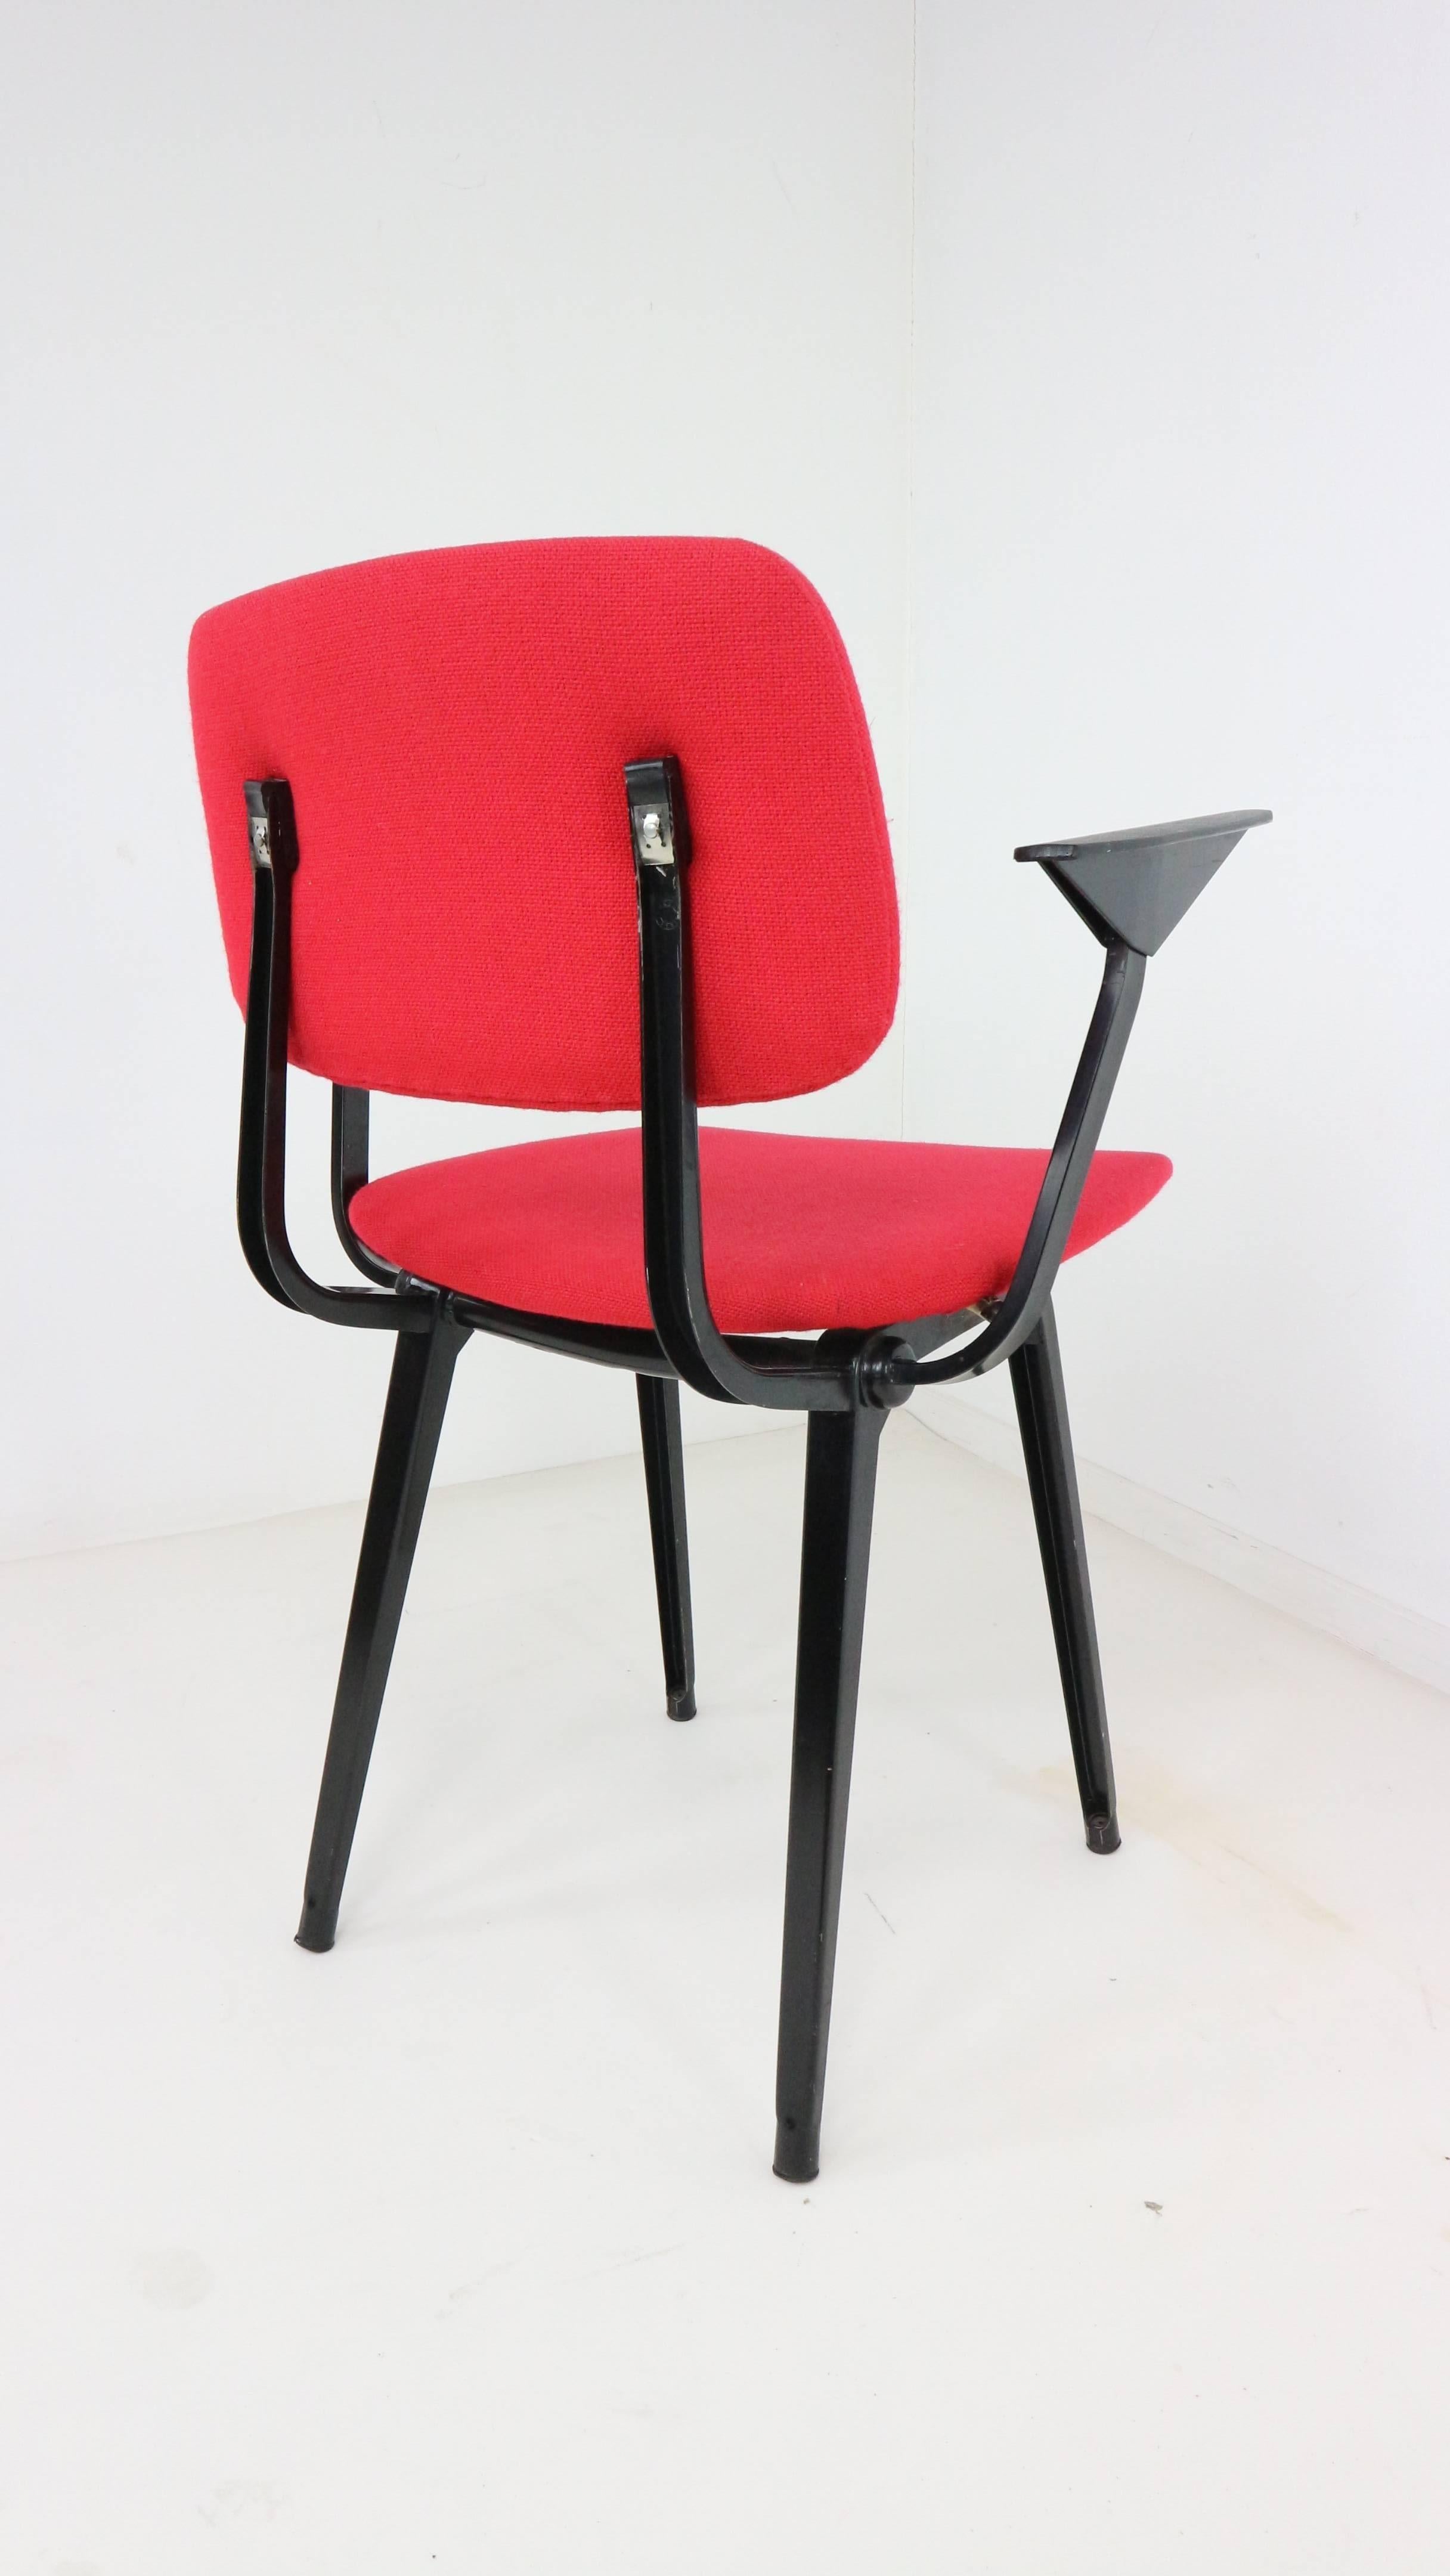 Seven Revolt armchairs designed by Friso Kramer for Ahrend de Cirkel, Holland, 1953. Though the revolt chair was already designed in 1953, the production started in 1958. The most chairs have stickers with the Ahrend de Cirkel logo, also impressed